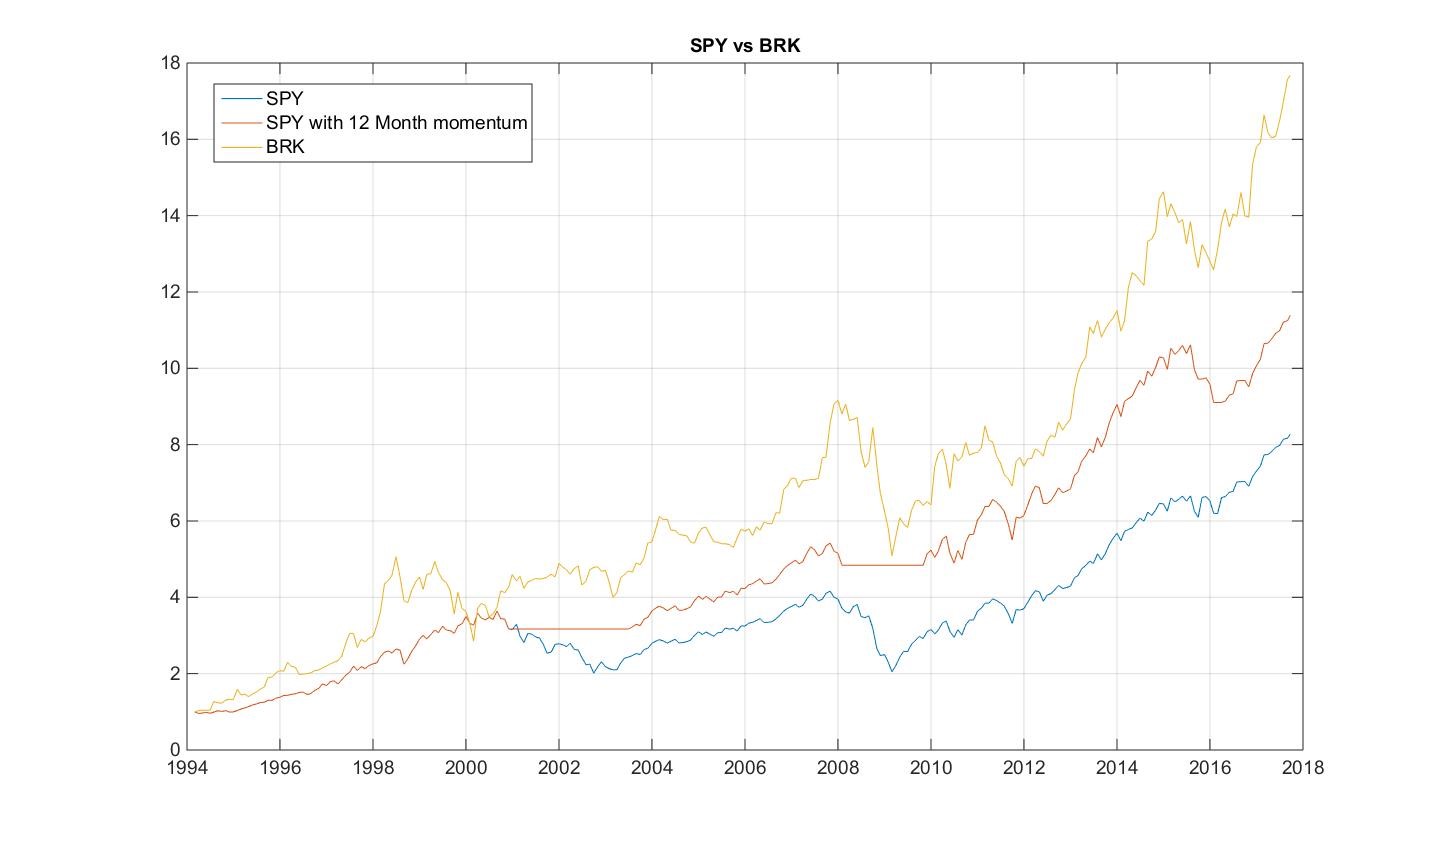 BRK vs SPY and SPY with Momentum applied